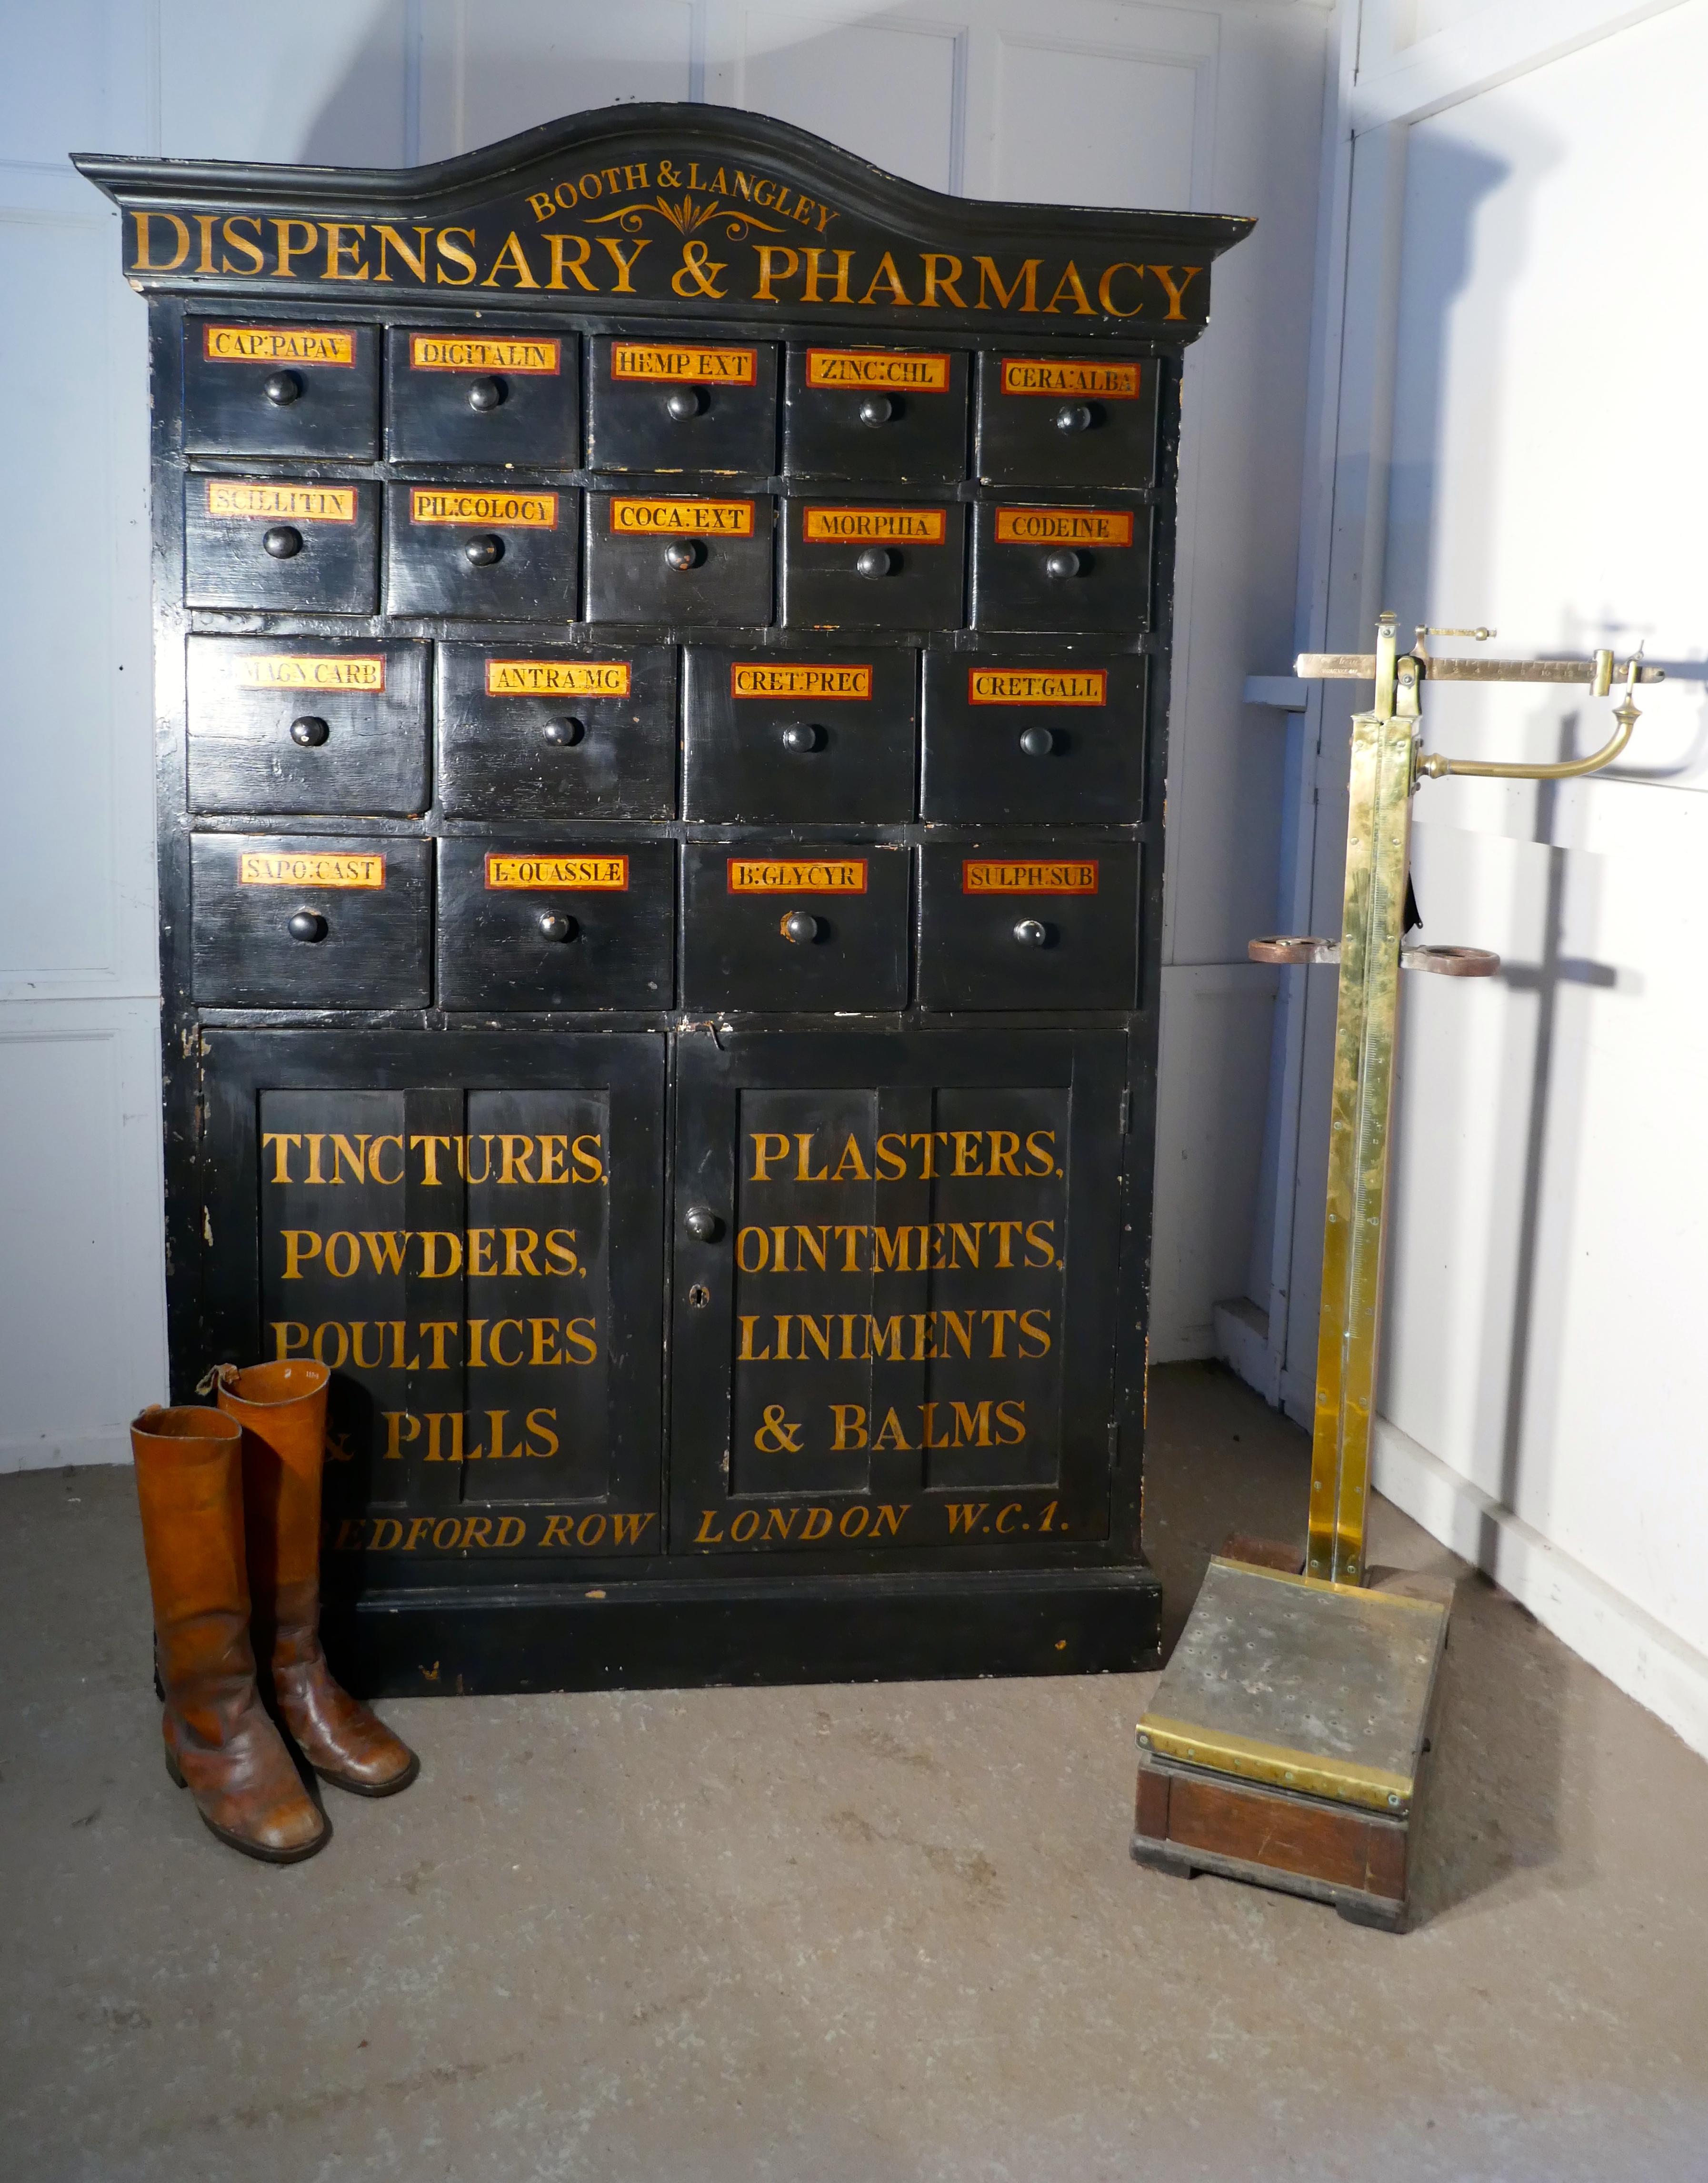 19th century chemist drawers 37 drawer, painted pharmacists cabinet

This is a delightful piece of Social History, the tall black cupboard has come from an old chemist shop
The cabinet has 10 small drawers, 8 slightly Larger drawers and a shelved